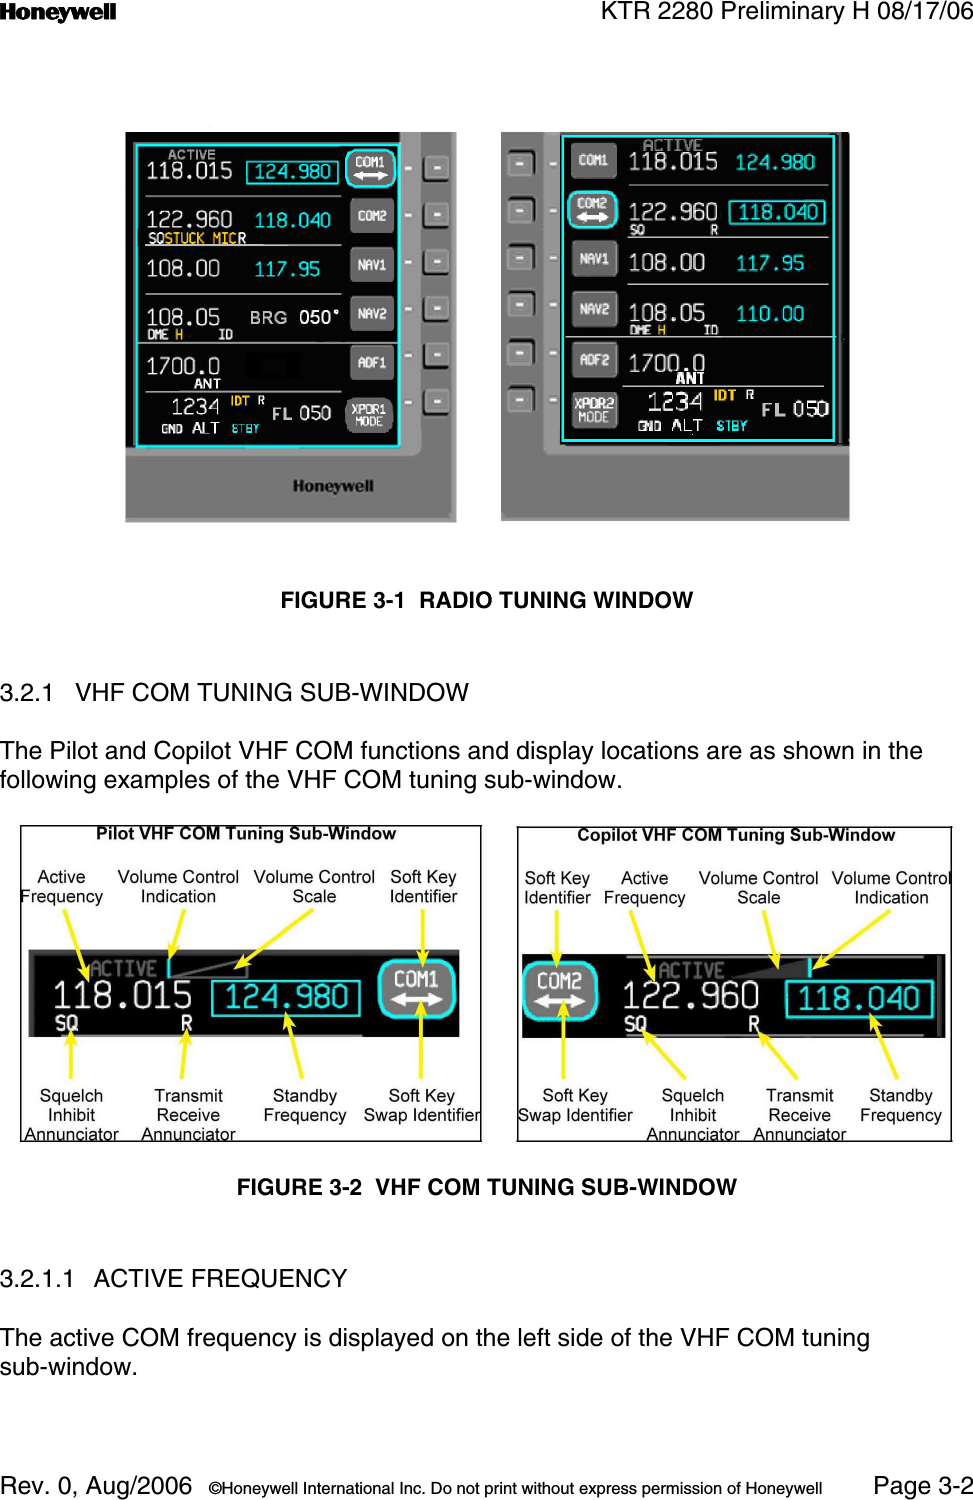 n KTR 2280 Preliminary H 08/17/06Rev. 0, Aug/2006  ©Honeywell International Inc. Do not print without express permission of Honeywell Page 3-2FIGURE 3-1  RADIO TUNING WINDOW3.2.1 VHF COM TUNING SUB-WINDOWThe Pilot and Copilot VHF COM functions and display locations are as shown in the following examples of the VHF COM tuning sub-window.FIGURE 3-2  VHF COM TUNING SUB-WINDOW3.2.1.1 ACTIVE FREQUENCYThe active COM frequency is displayed on the left side of the VHF COM tuning sub-window.